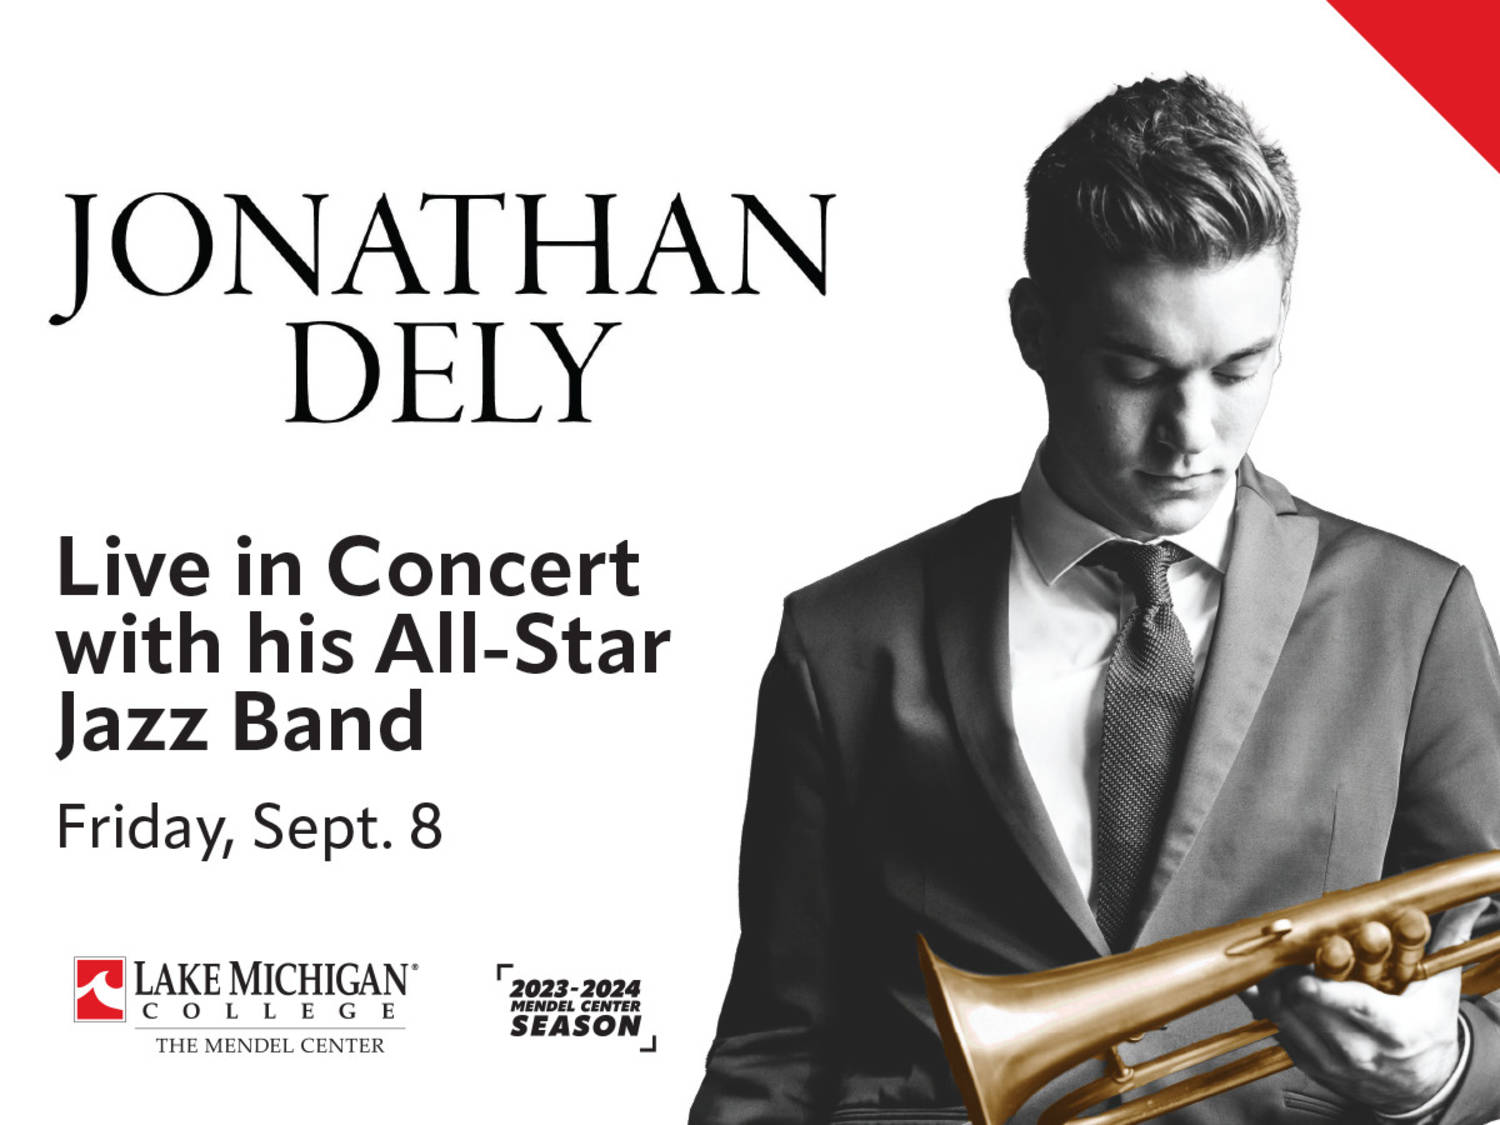 Jonathan Dely and his All-Star Jazz Band open the Lake Michigan College Mendel Center Mainstage season Sept. 8